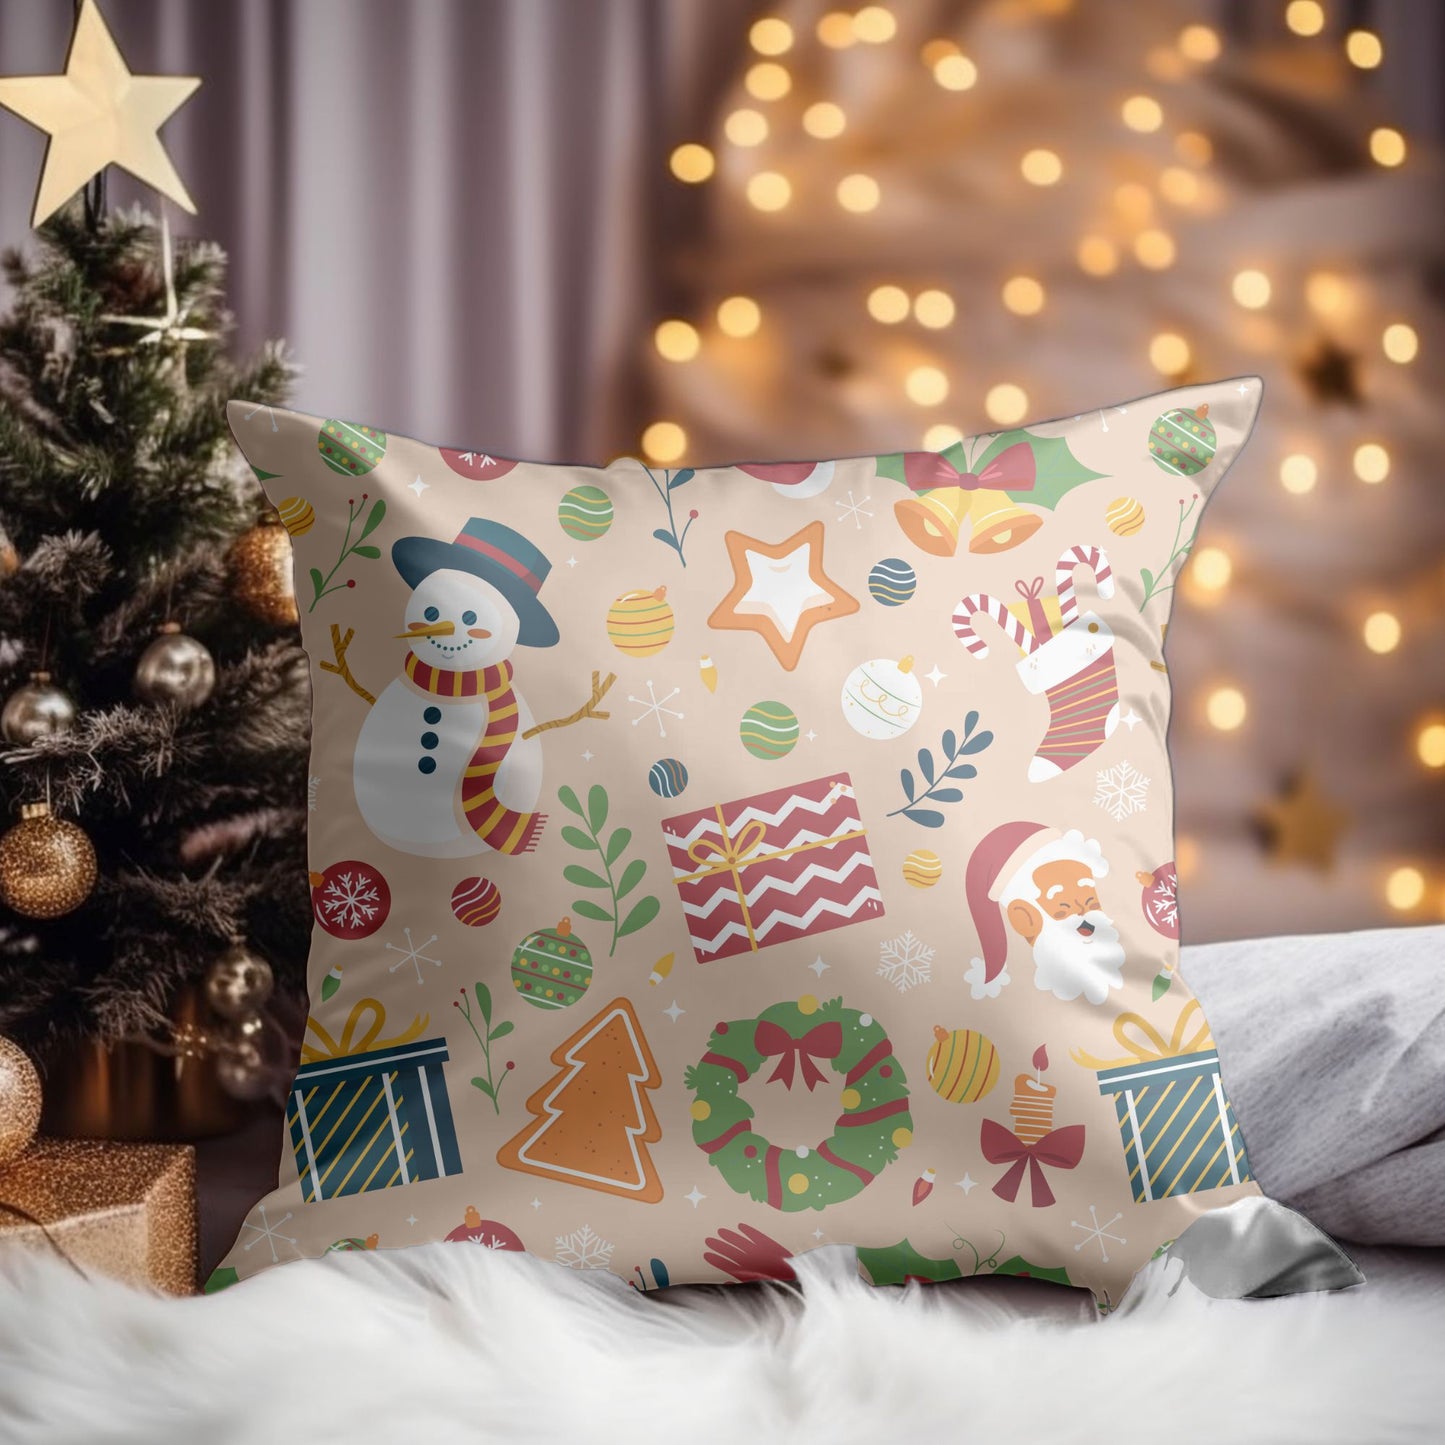 Christmas-Themed Decorative Pillow with Traditional Plaid